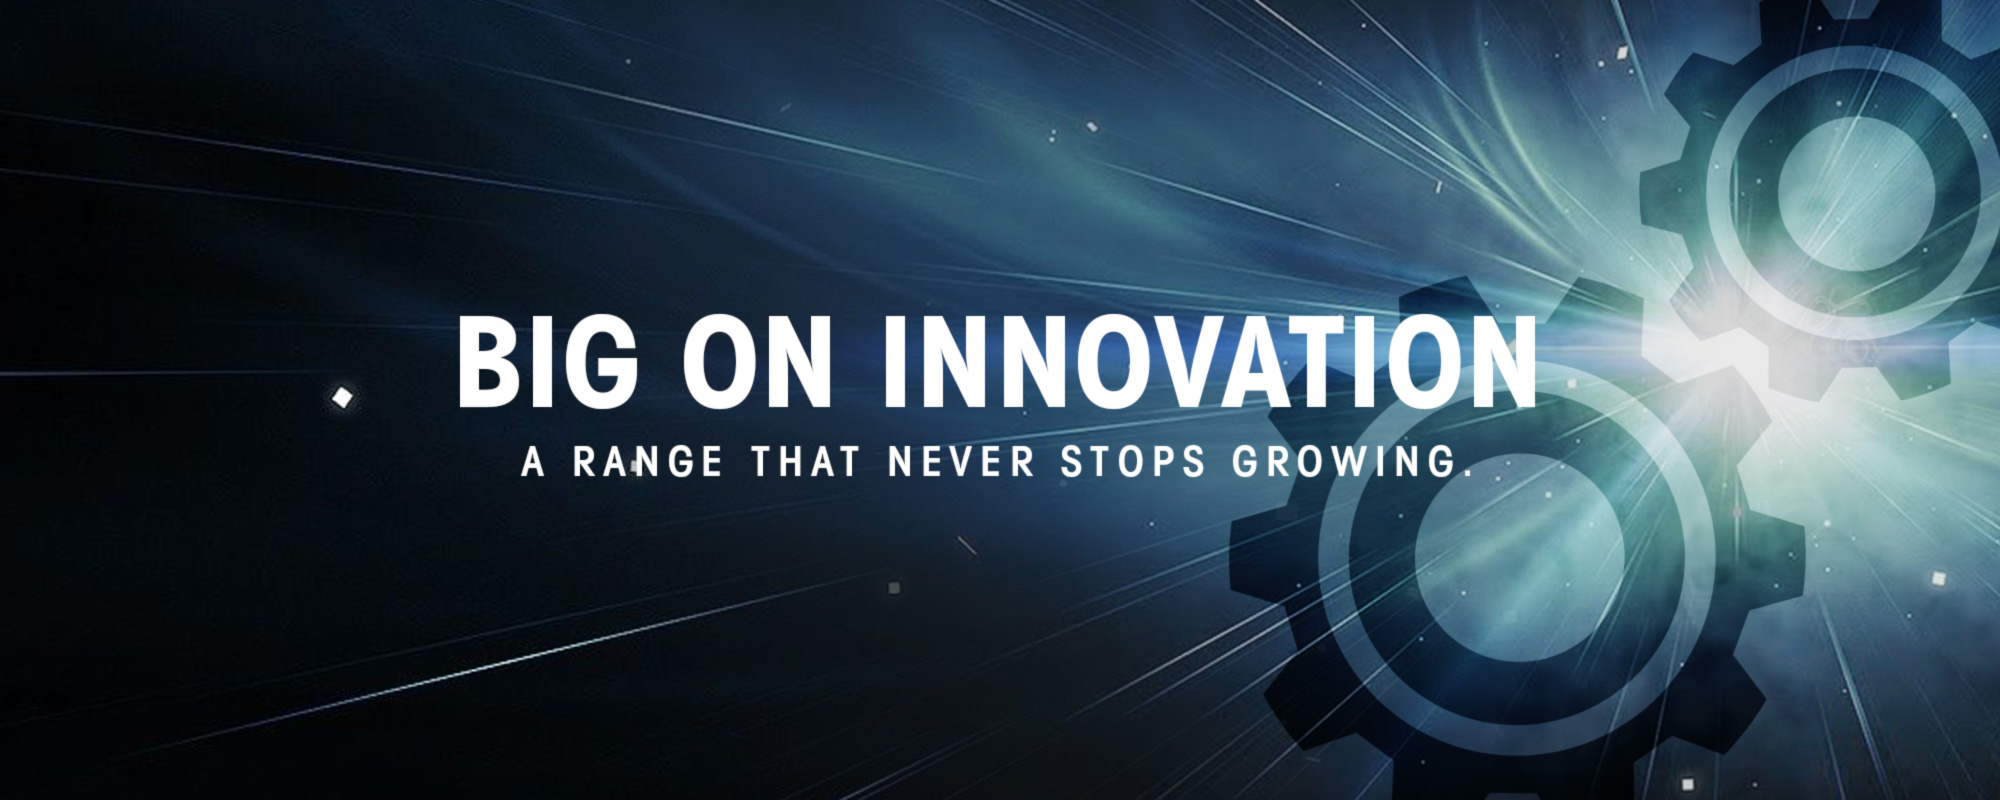 Big On Innovation a range that never stops growing